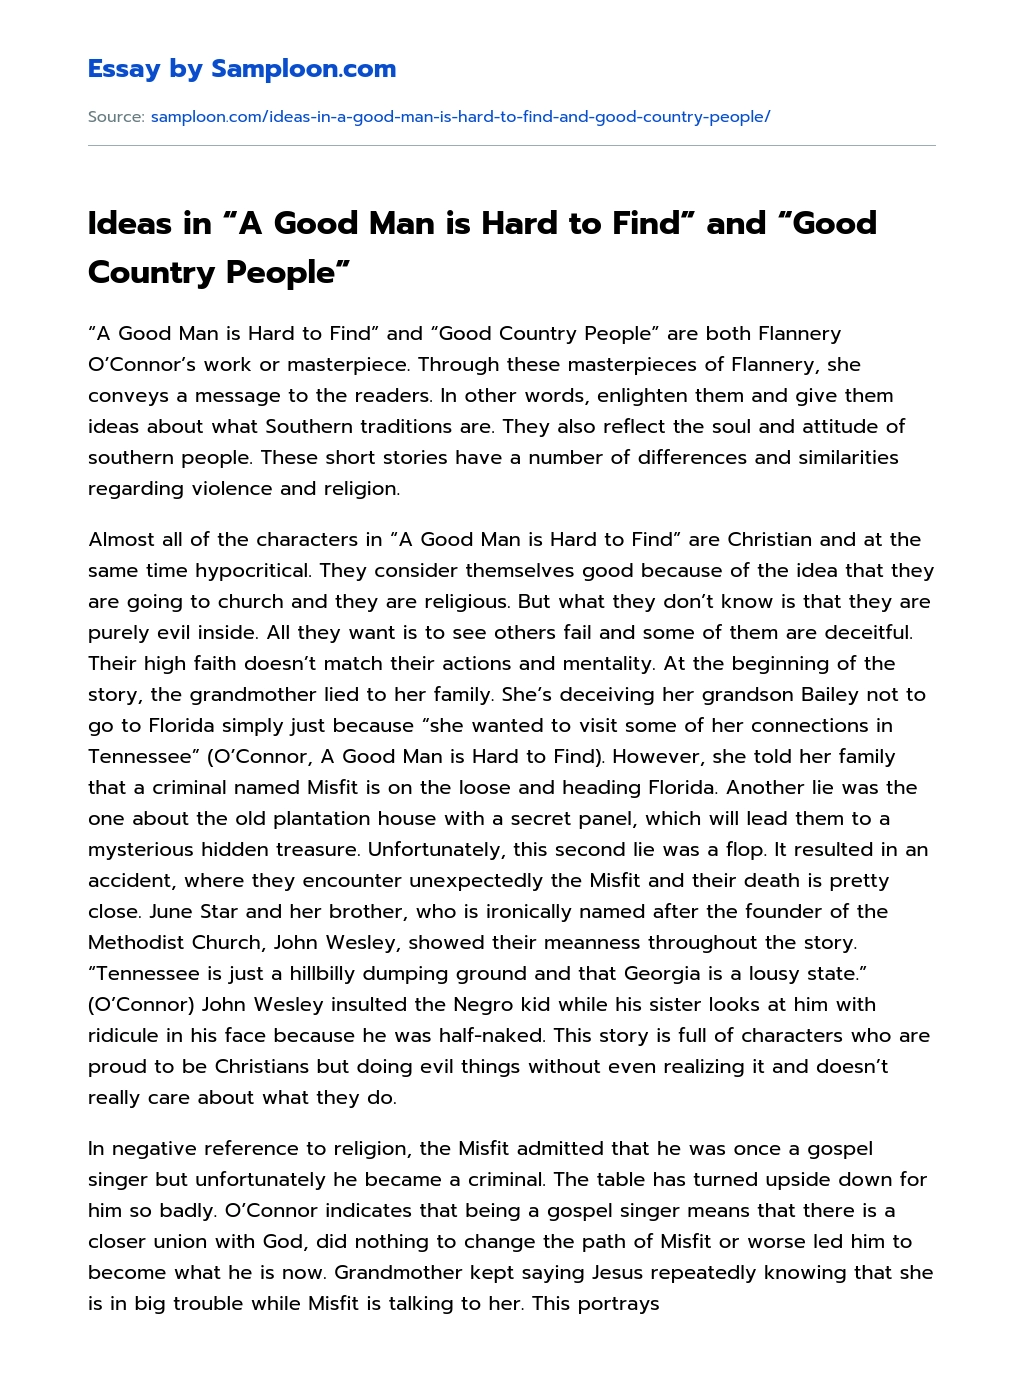 Ideas in “A Good Man is Hard to Find” and “Good Country People” Summary essay